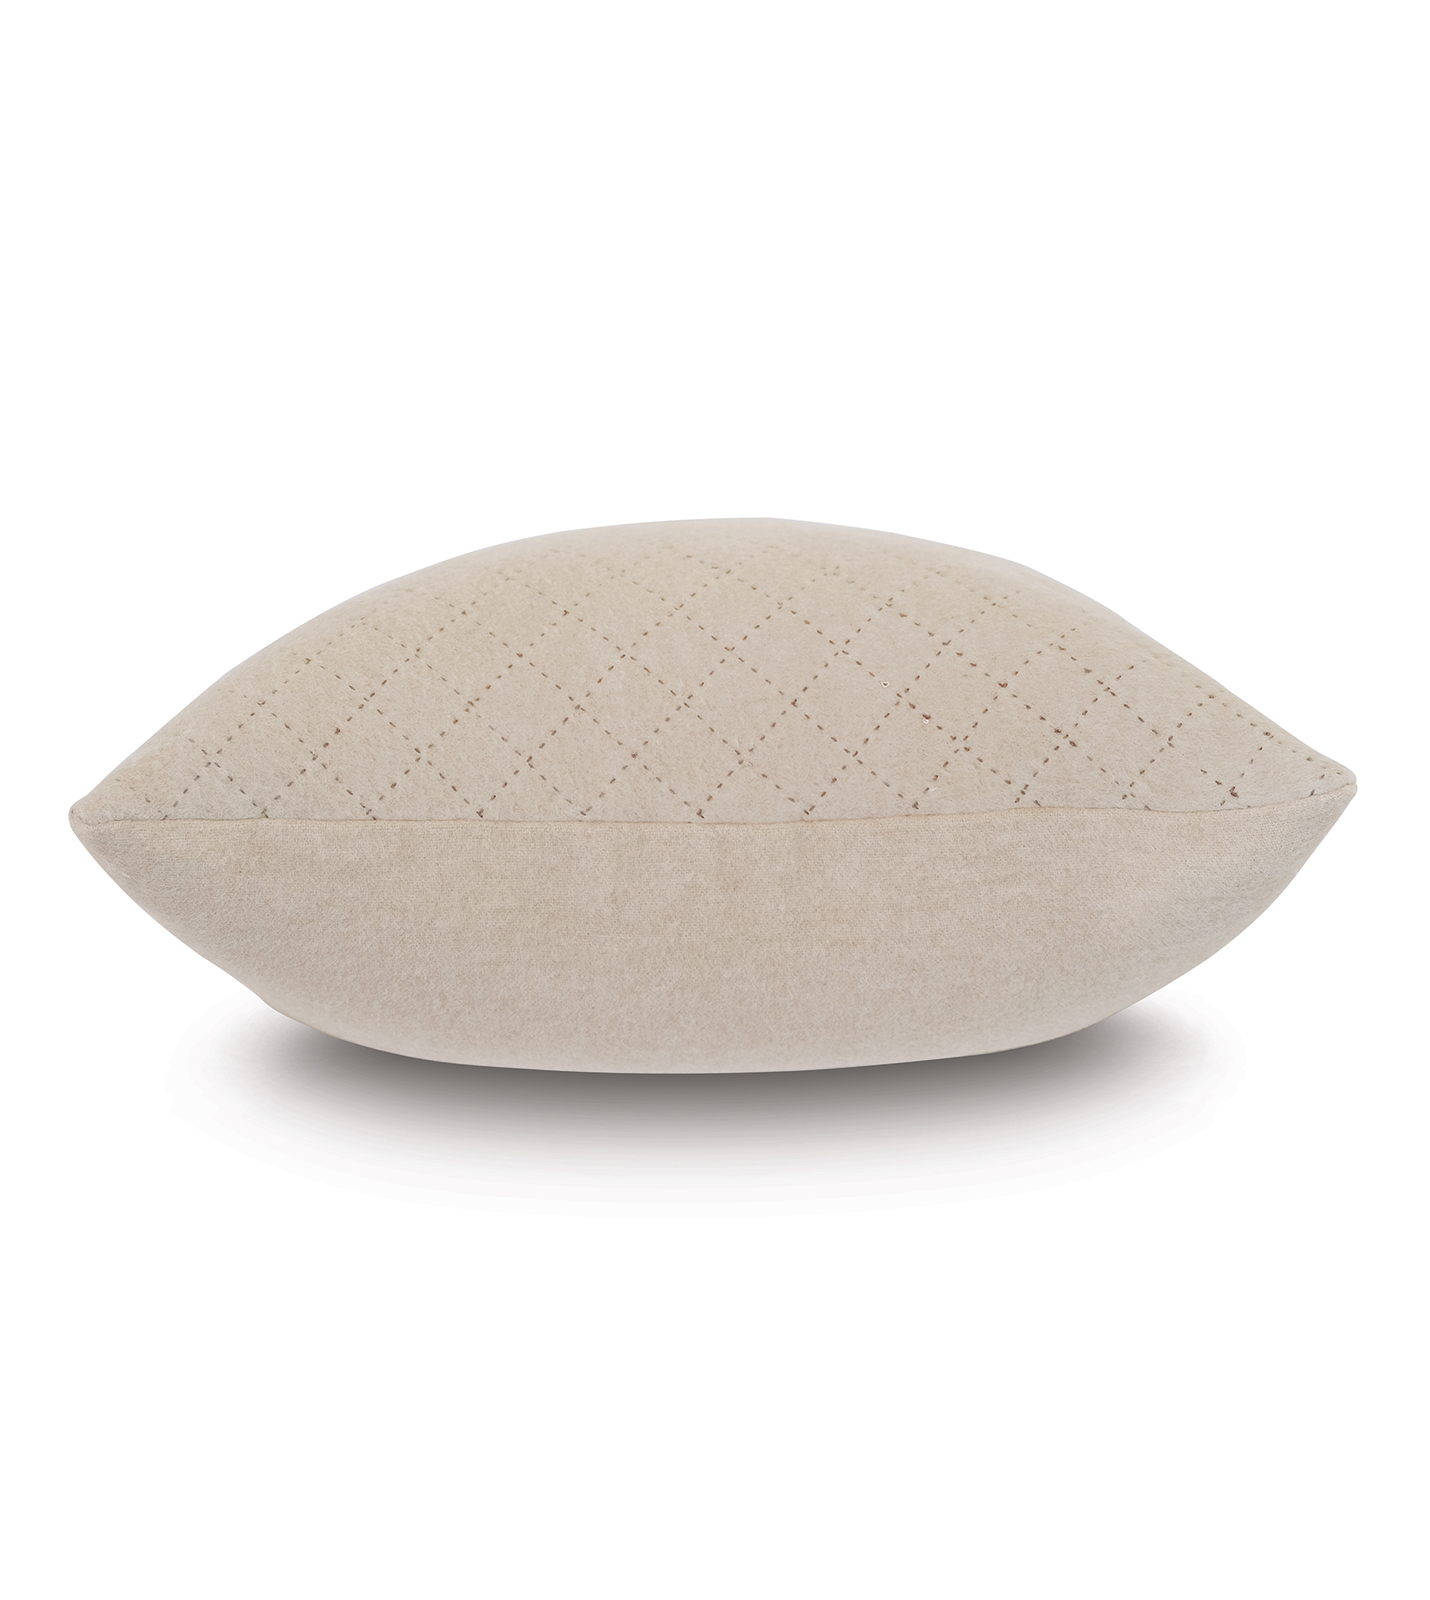 Brera Diagonal Tailor Tacks Decorative Pillow In Bisque | Eastern Accents